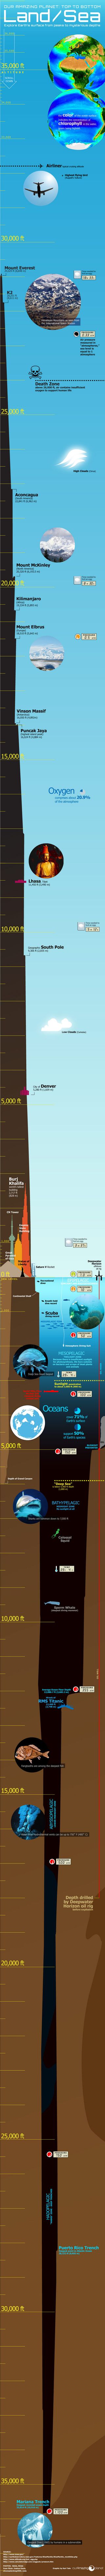 Tallest Mountain to Deepest Ocean Trench